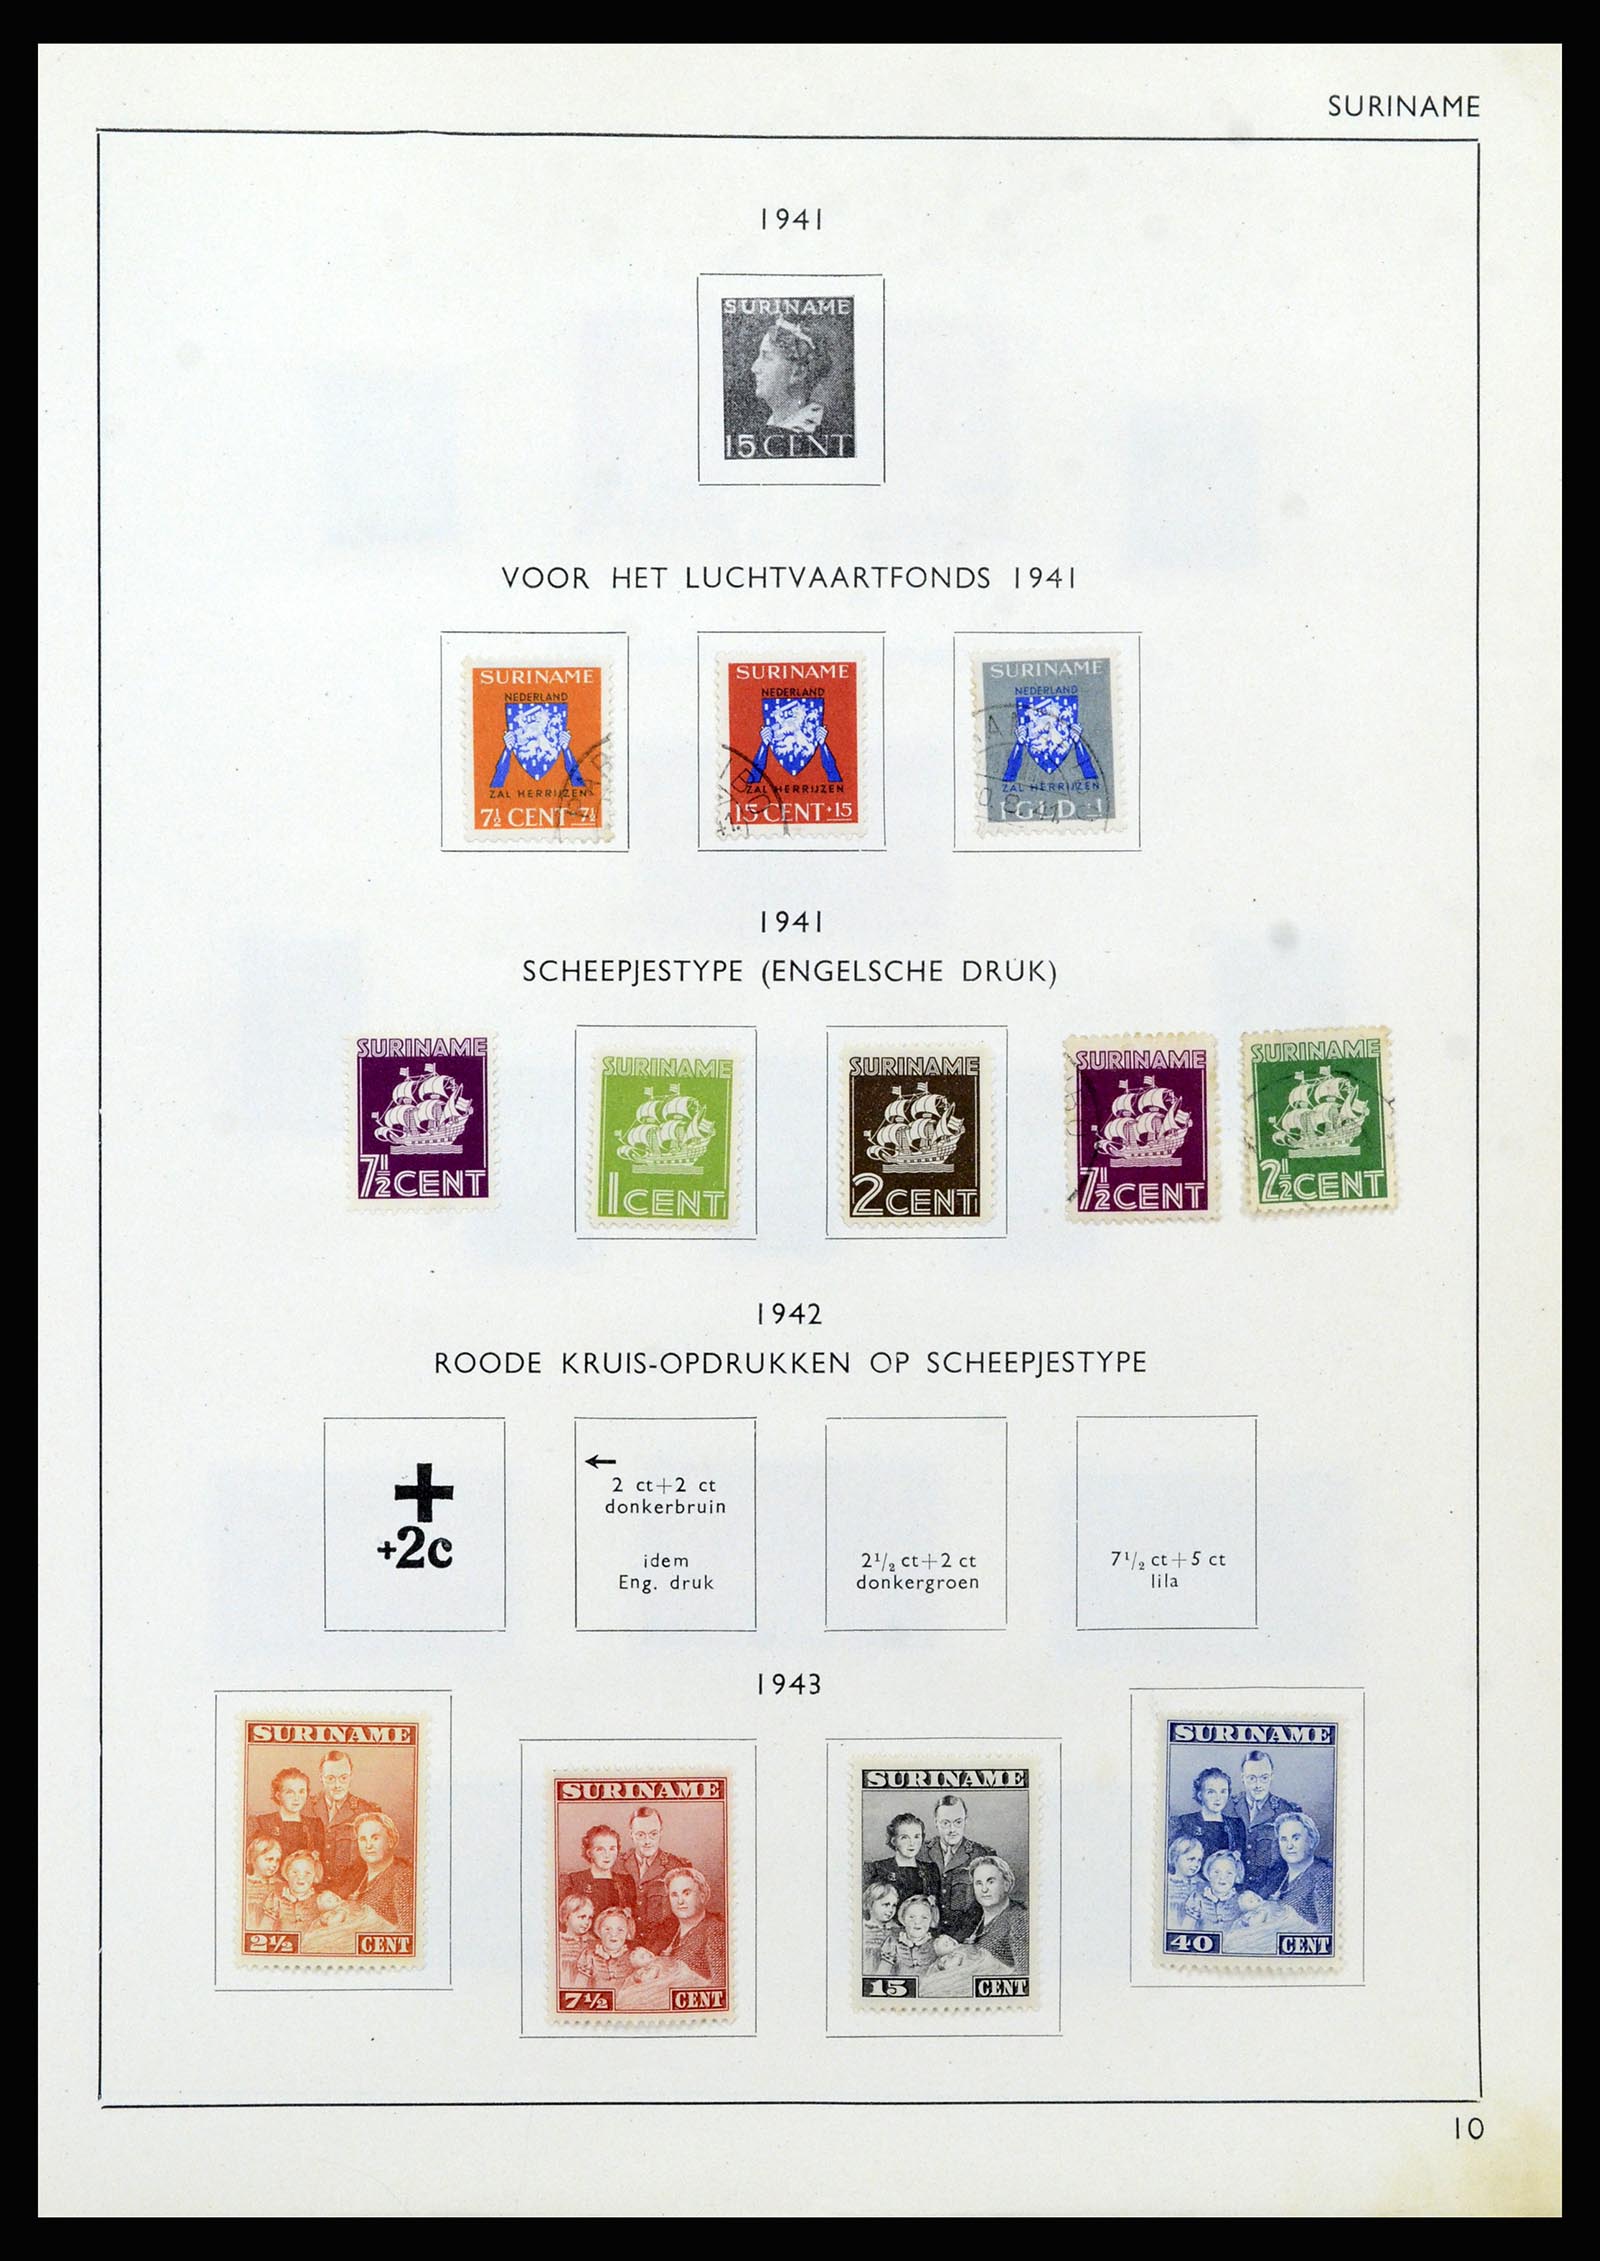 37217 093 - Stamp collection 37217 Dutch territories 1864-1975.